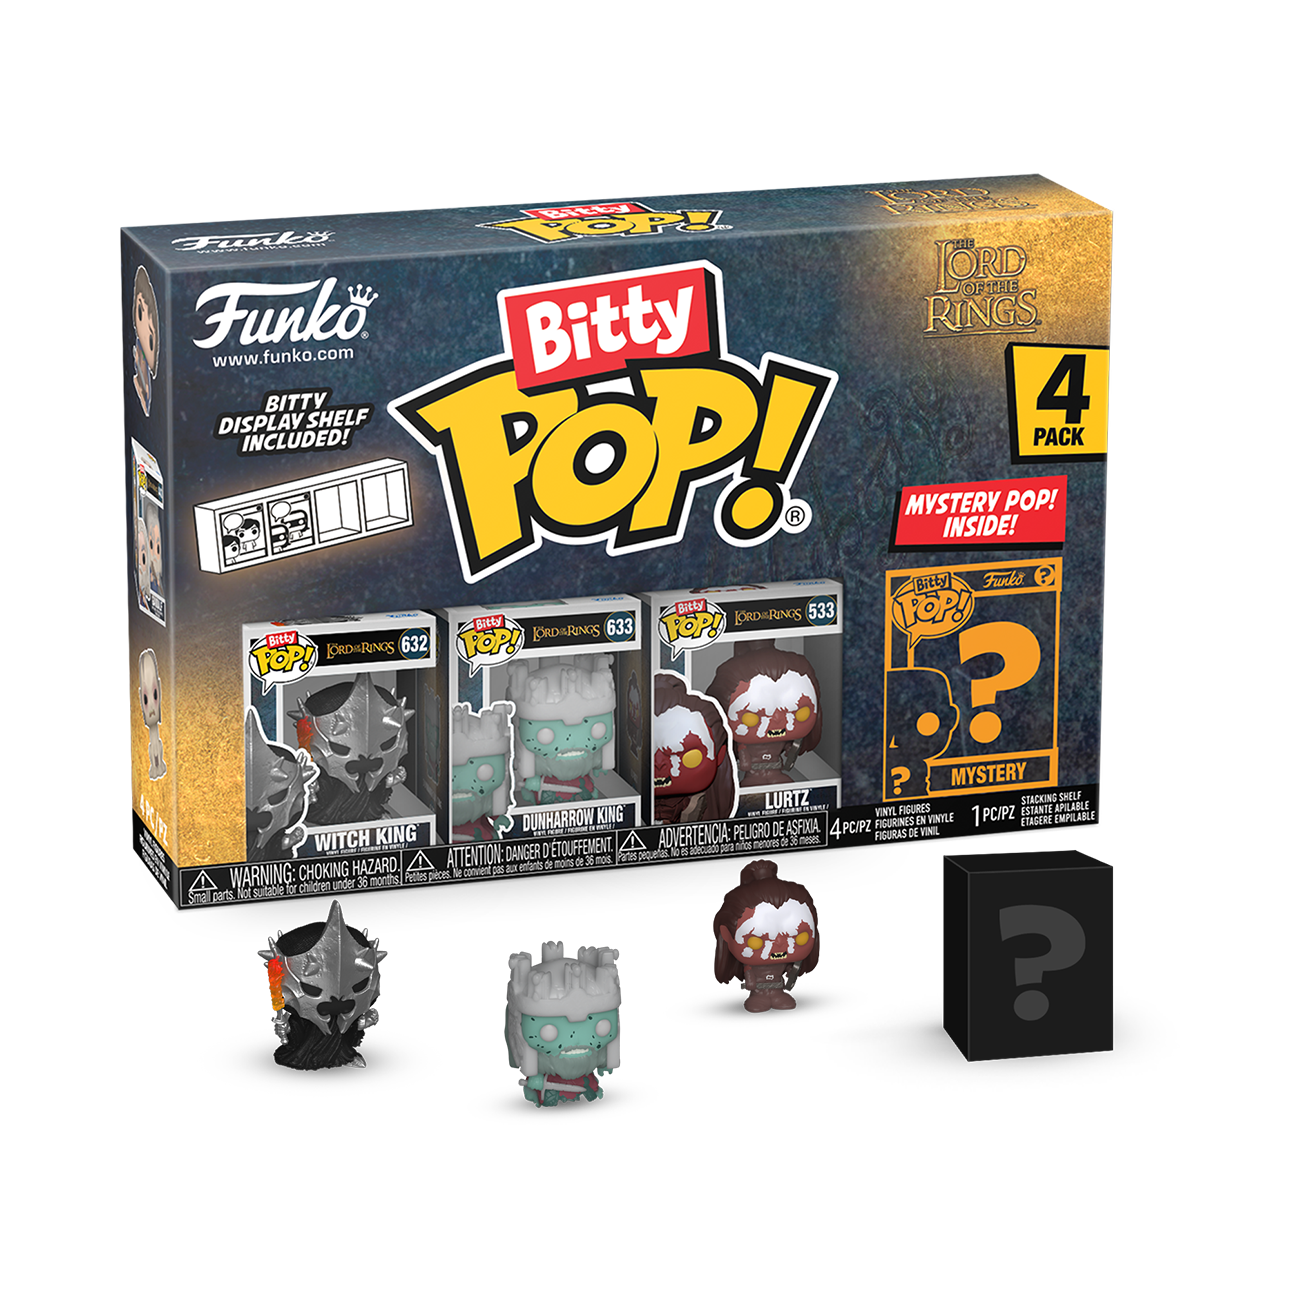 Photos - Action Figures / Transformers Funko BITTY POP! The Lord Of The Rings 4-Pack Series 4 